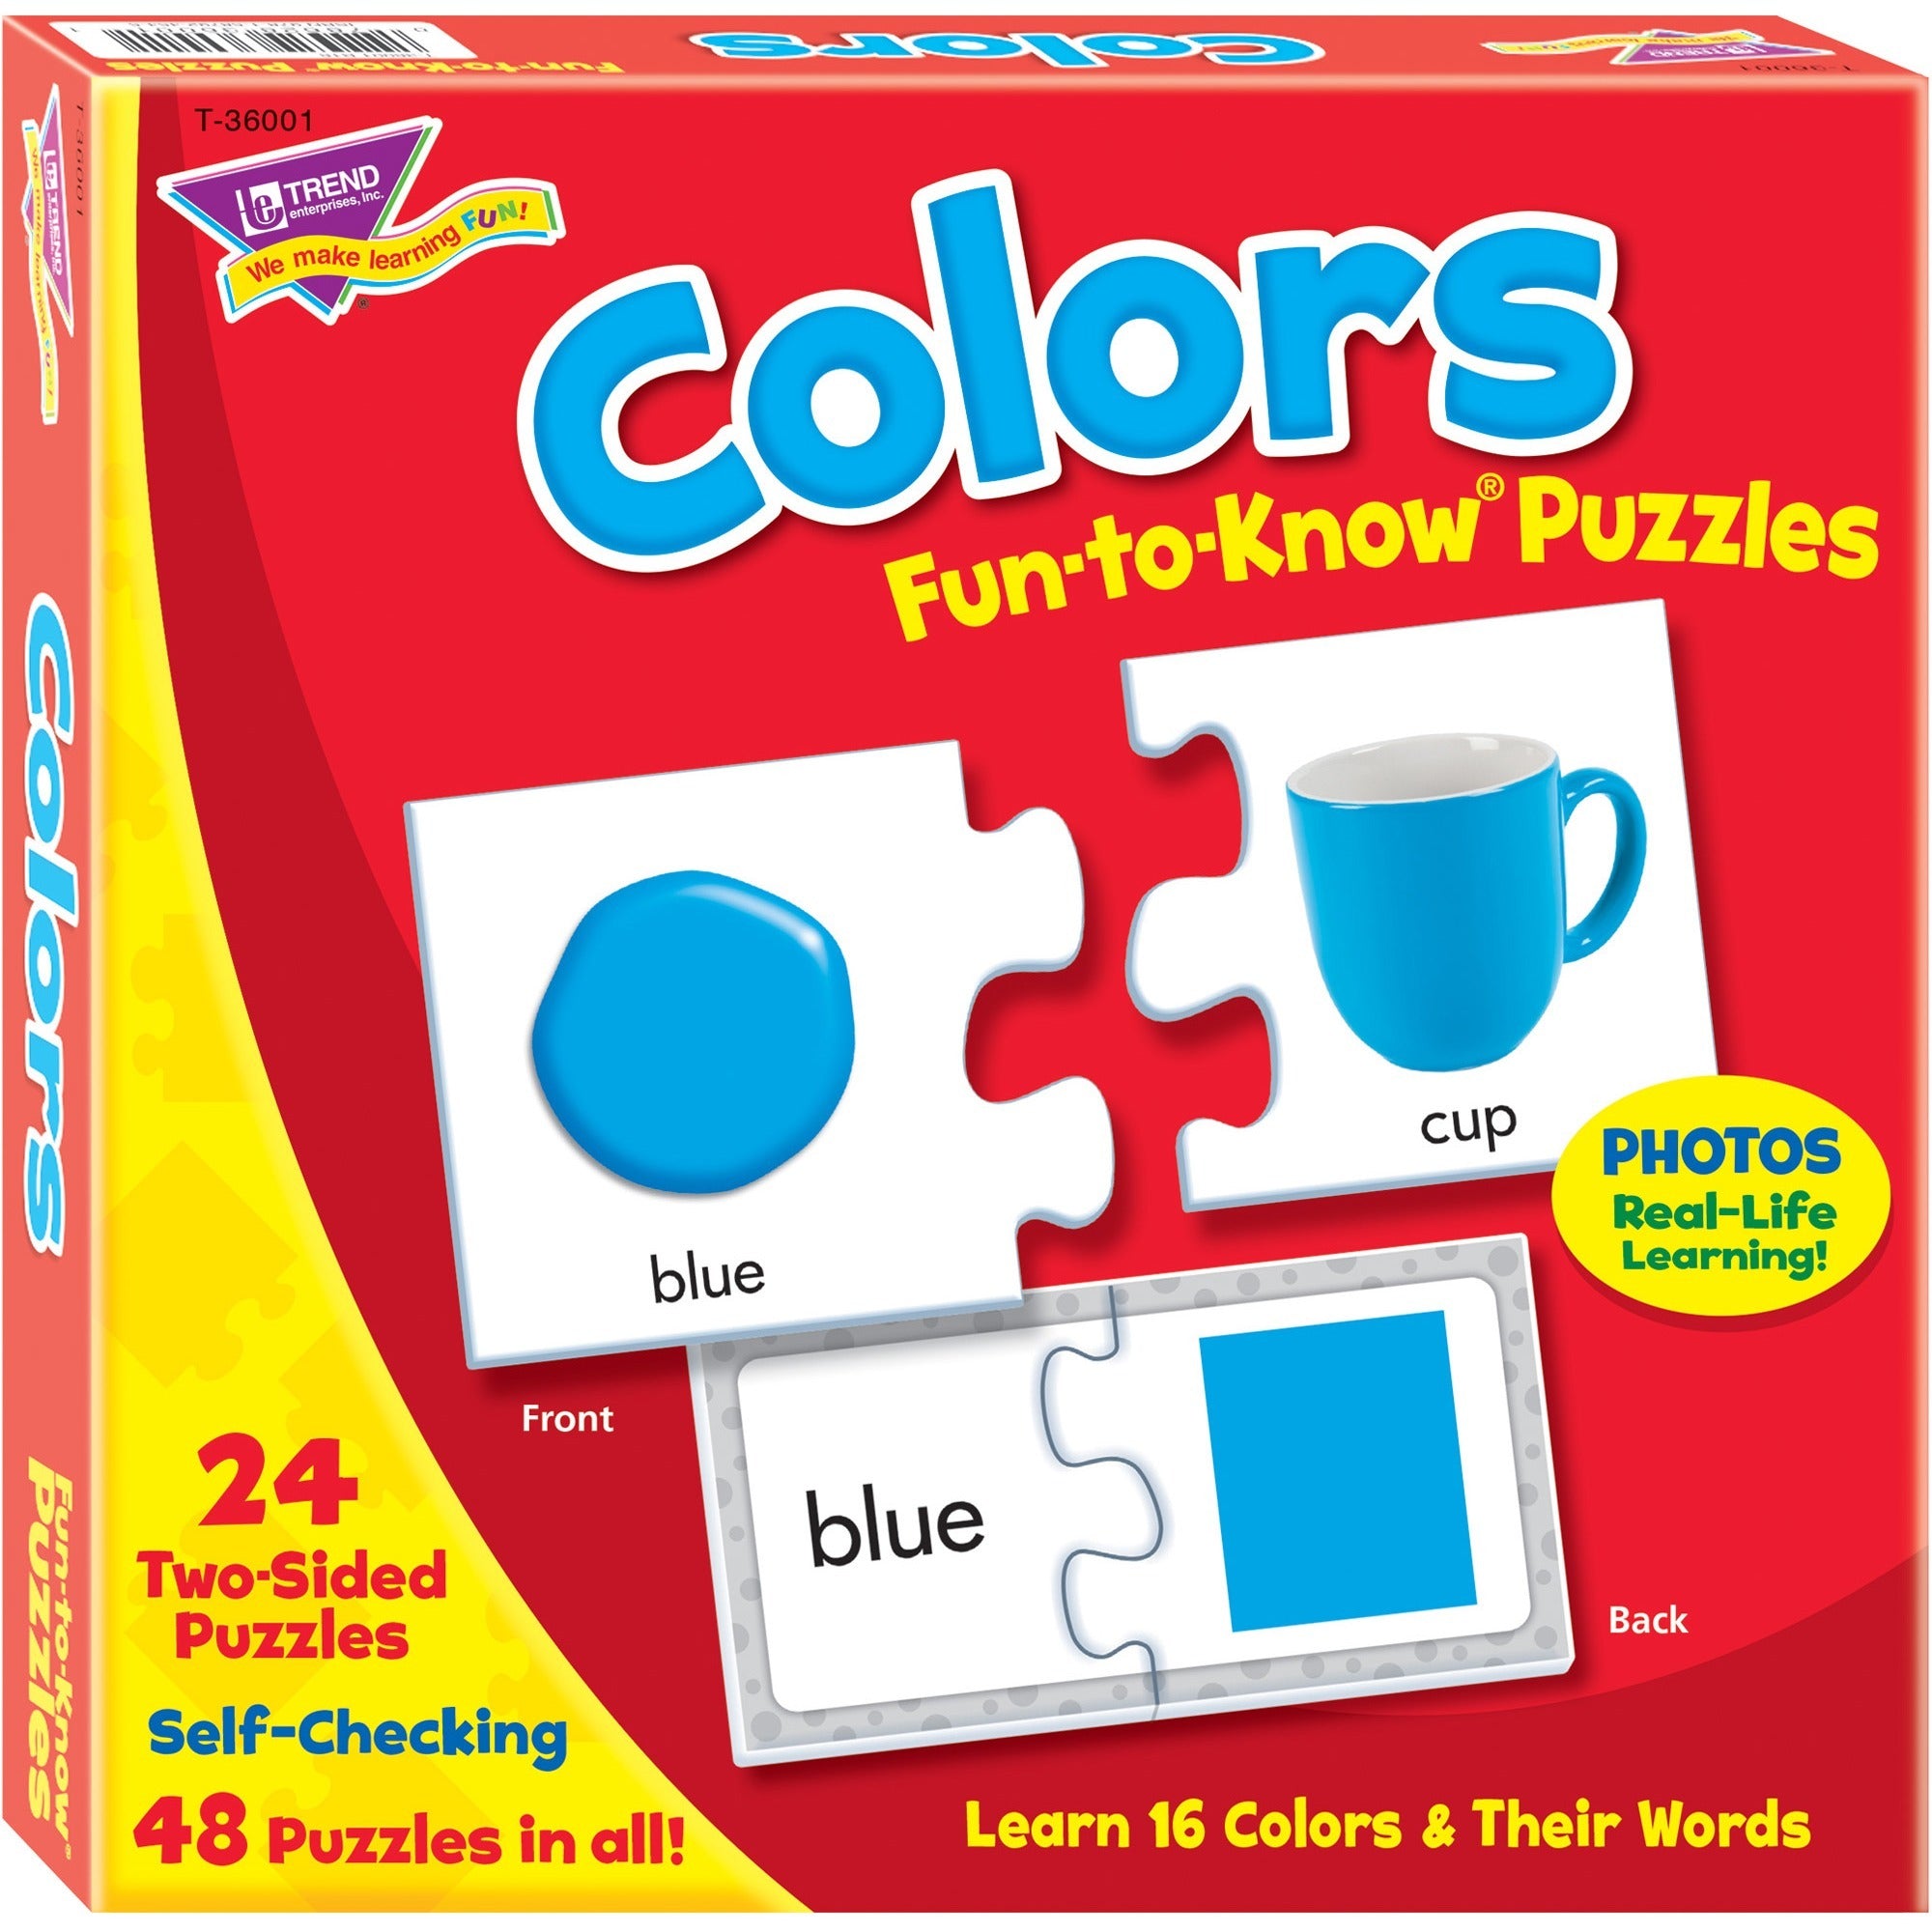 trend-colors-fun-to-know-puzzles-theme-subject-learning-fun-5-14-year48-piece_tep36001 - 1